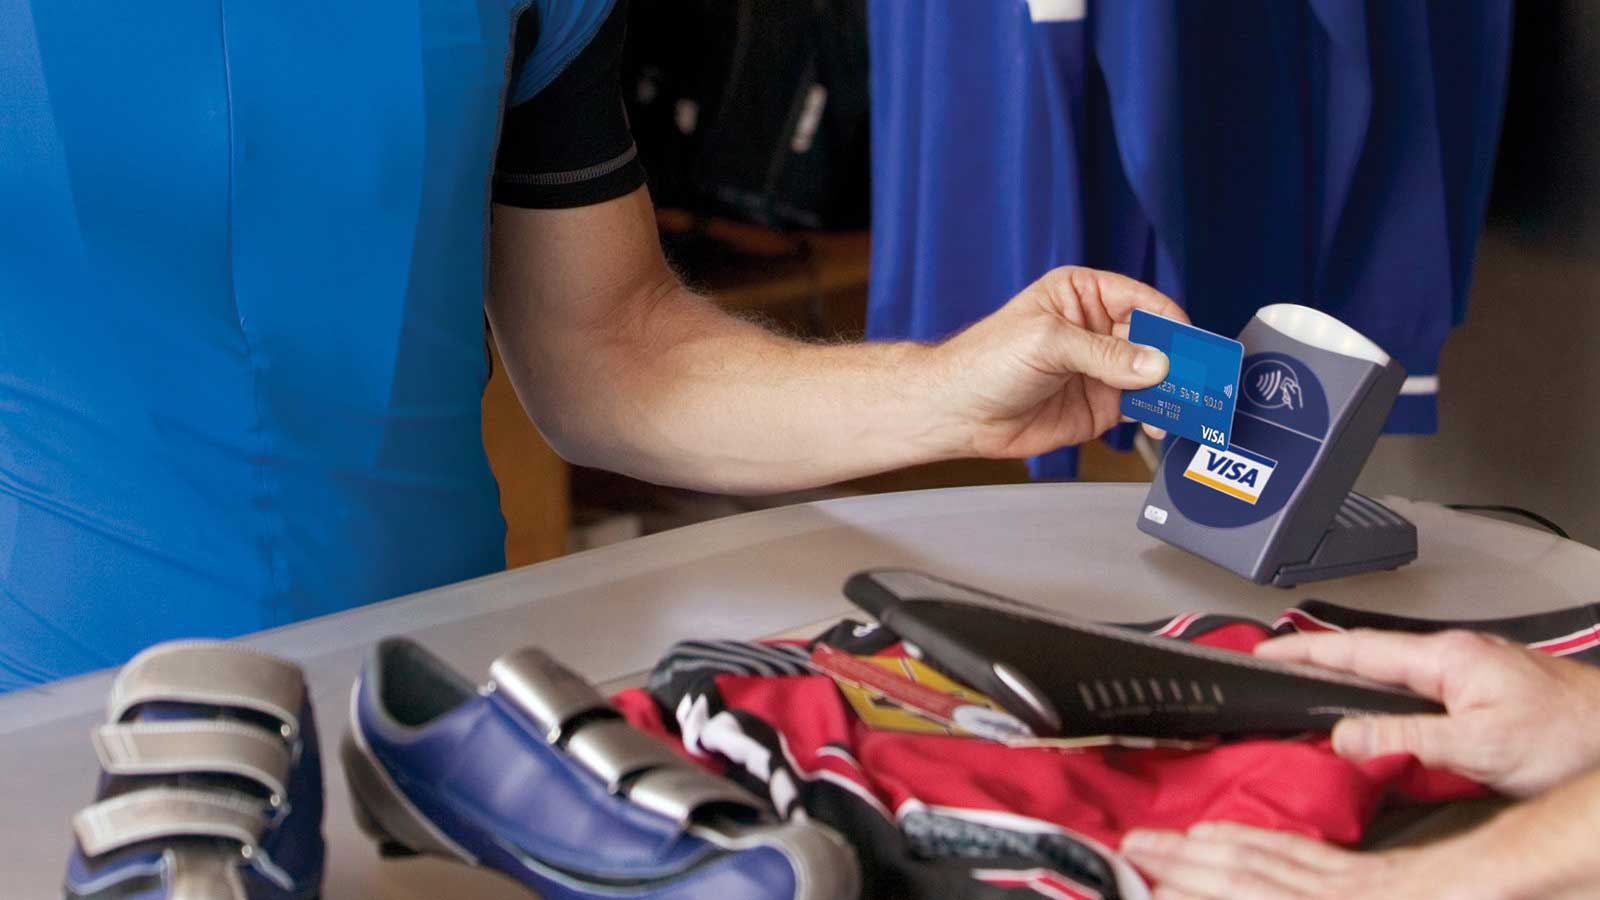 Person using Visa contactless card to pay for shoes.